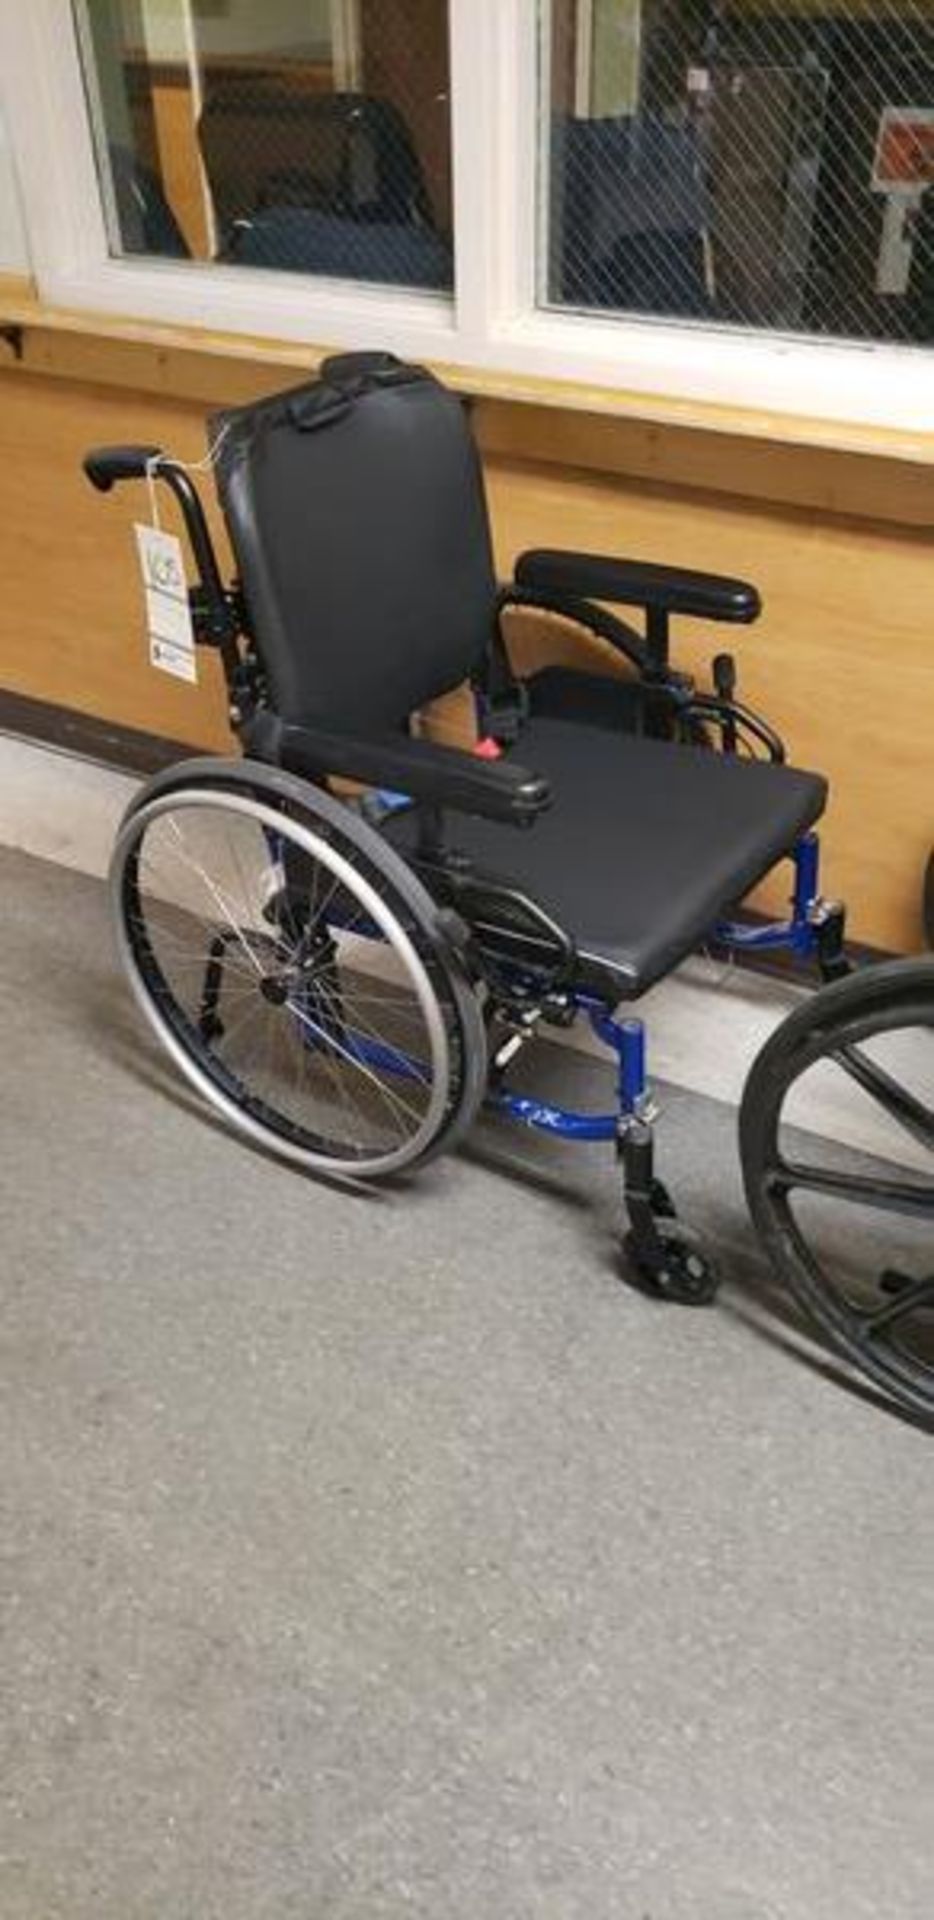 2 ASSORTED WHEEL CHAIRS GX AND K2 LITE - Image 5 of 7